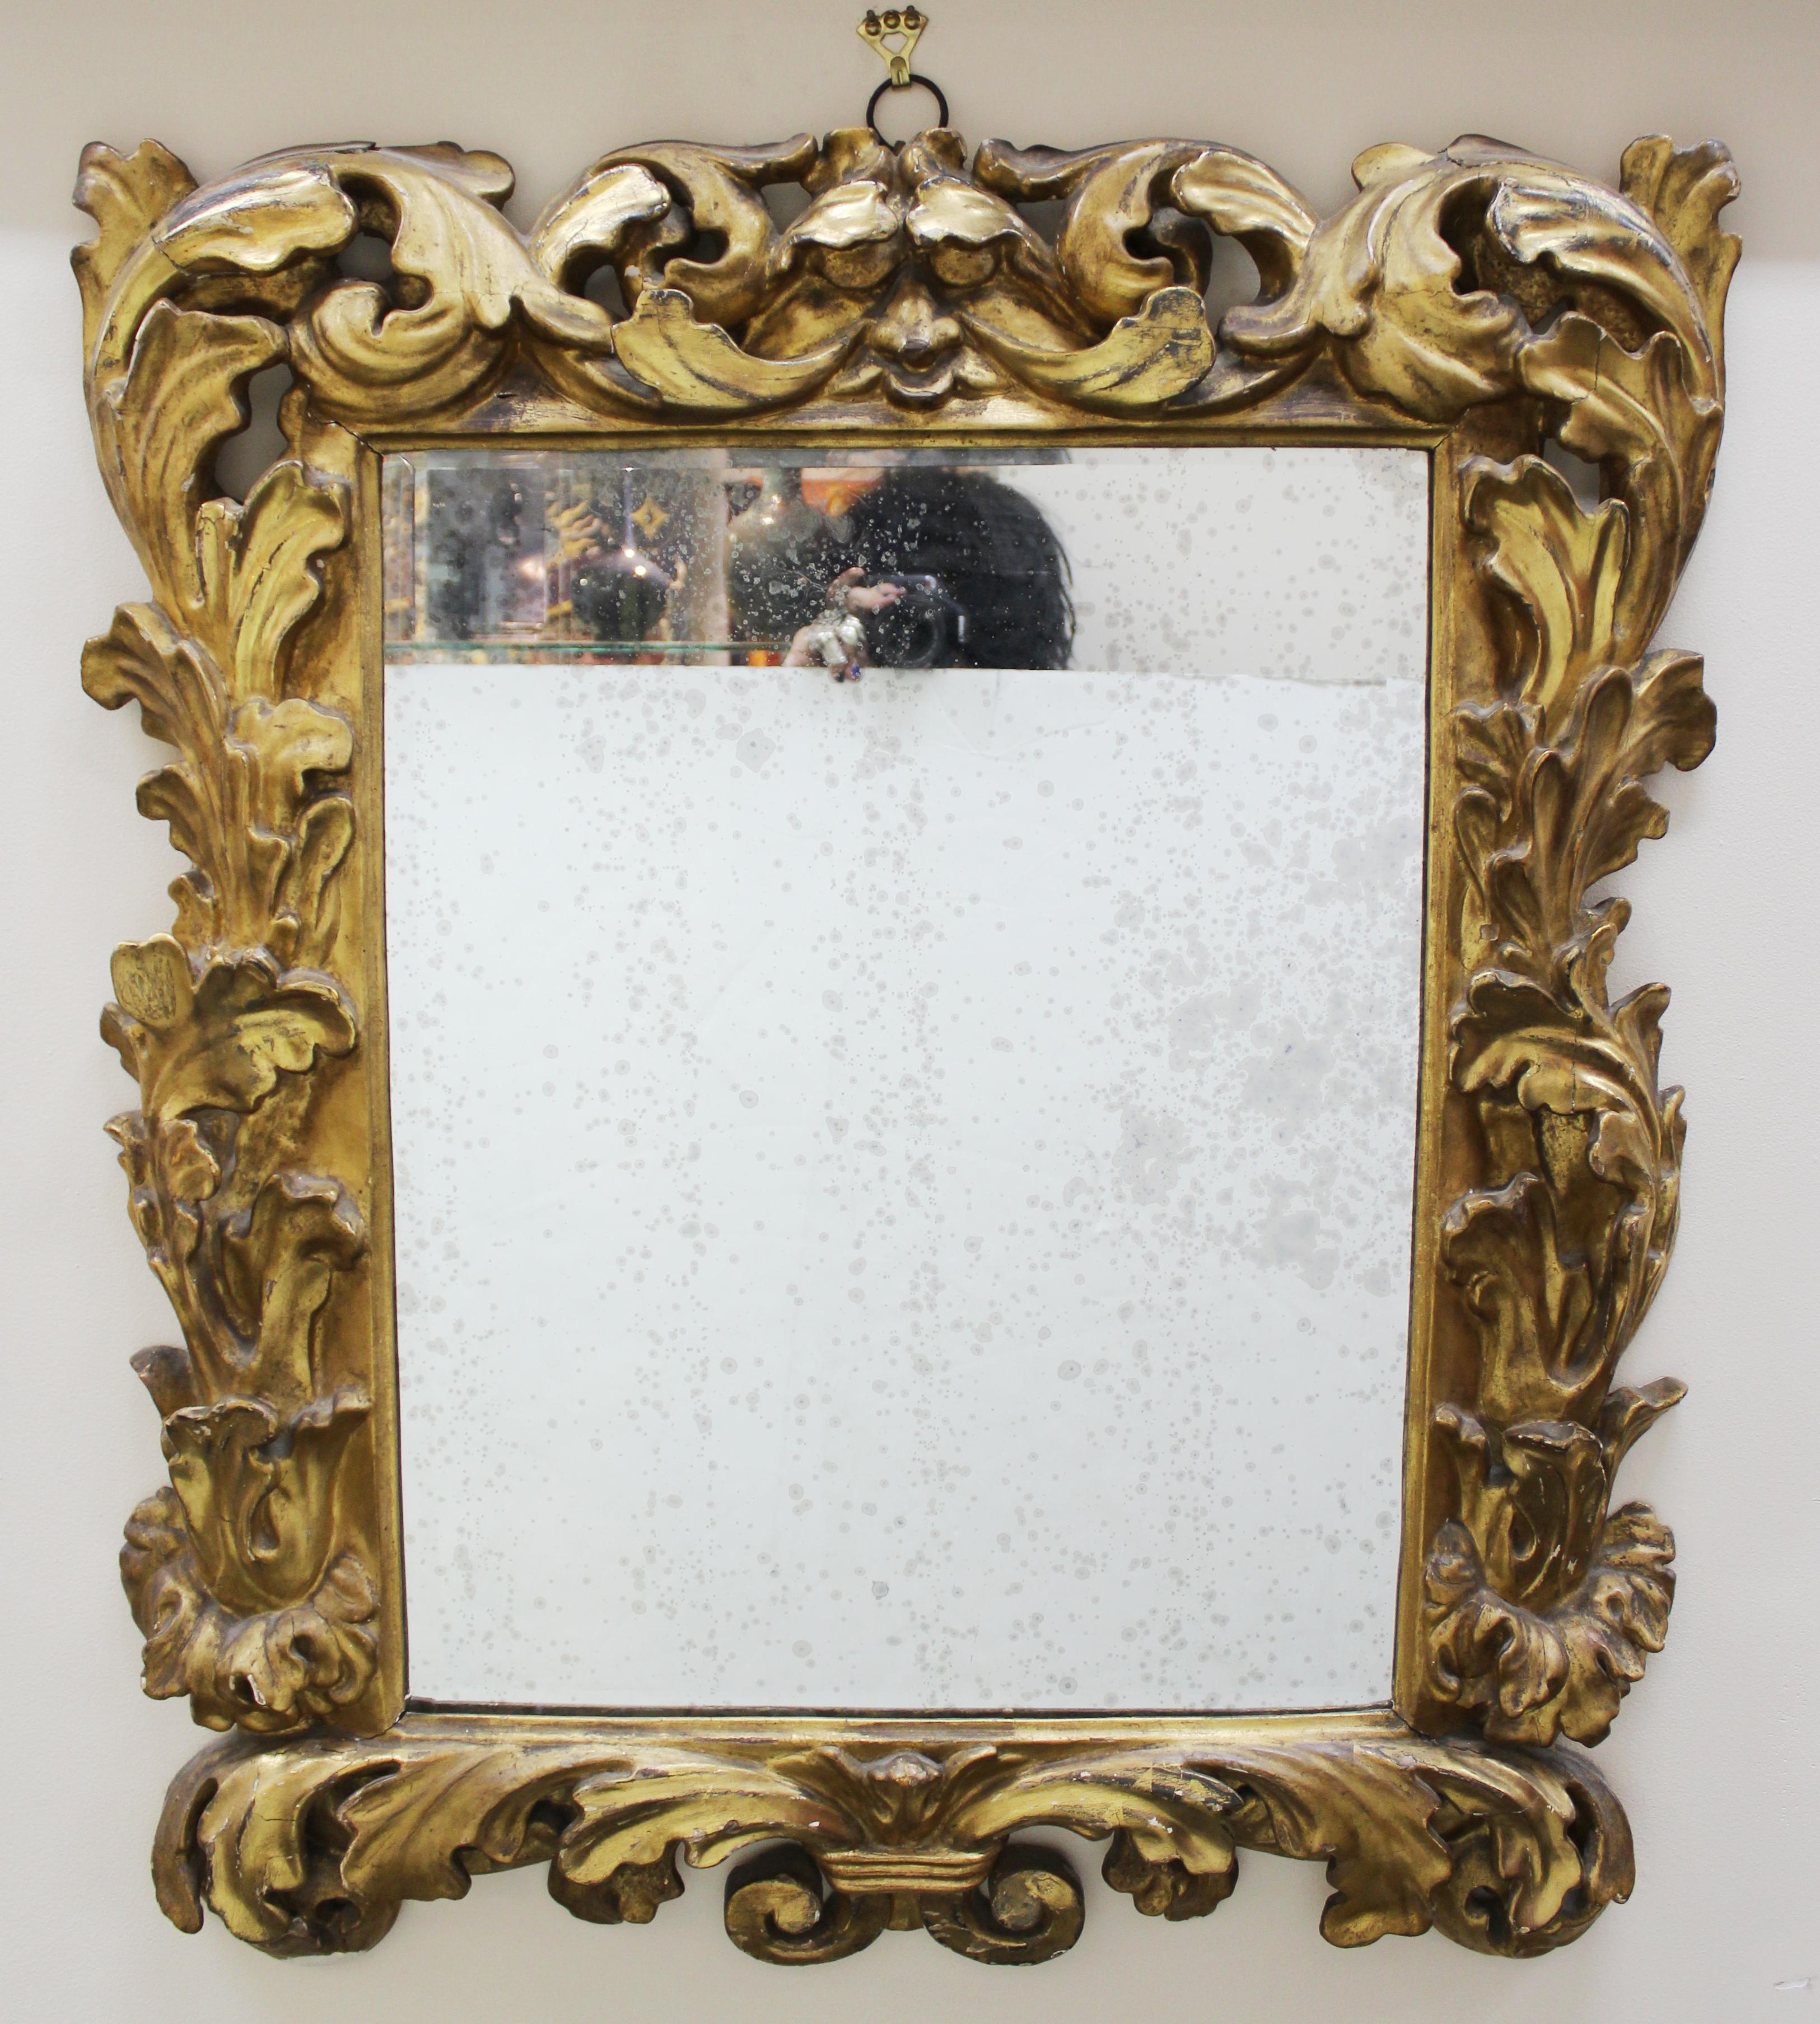 Italian Baroque giltwood wall mirror with heavily sculpted acanthus leave decor on the border and a stylized human face formed by the leaves on the central upper border. The piece was made in Italy in the 18th century and is in good antique